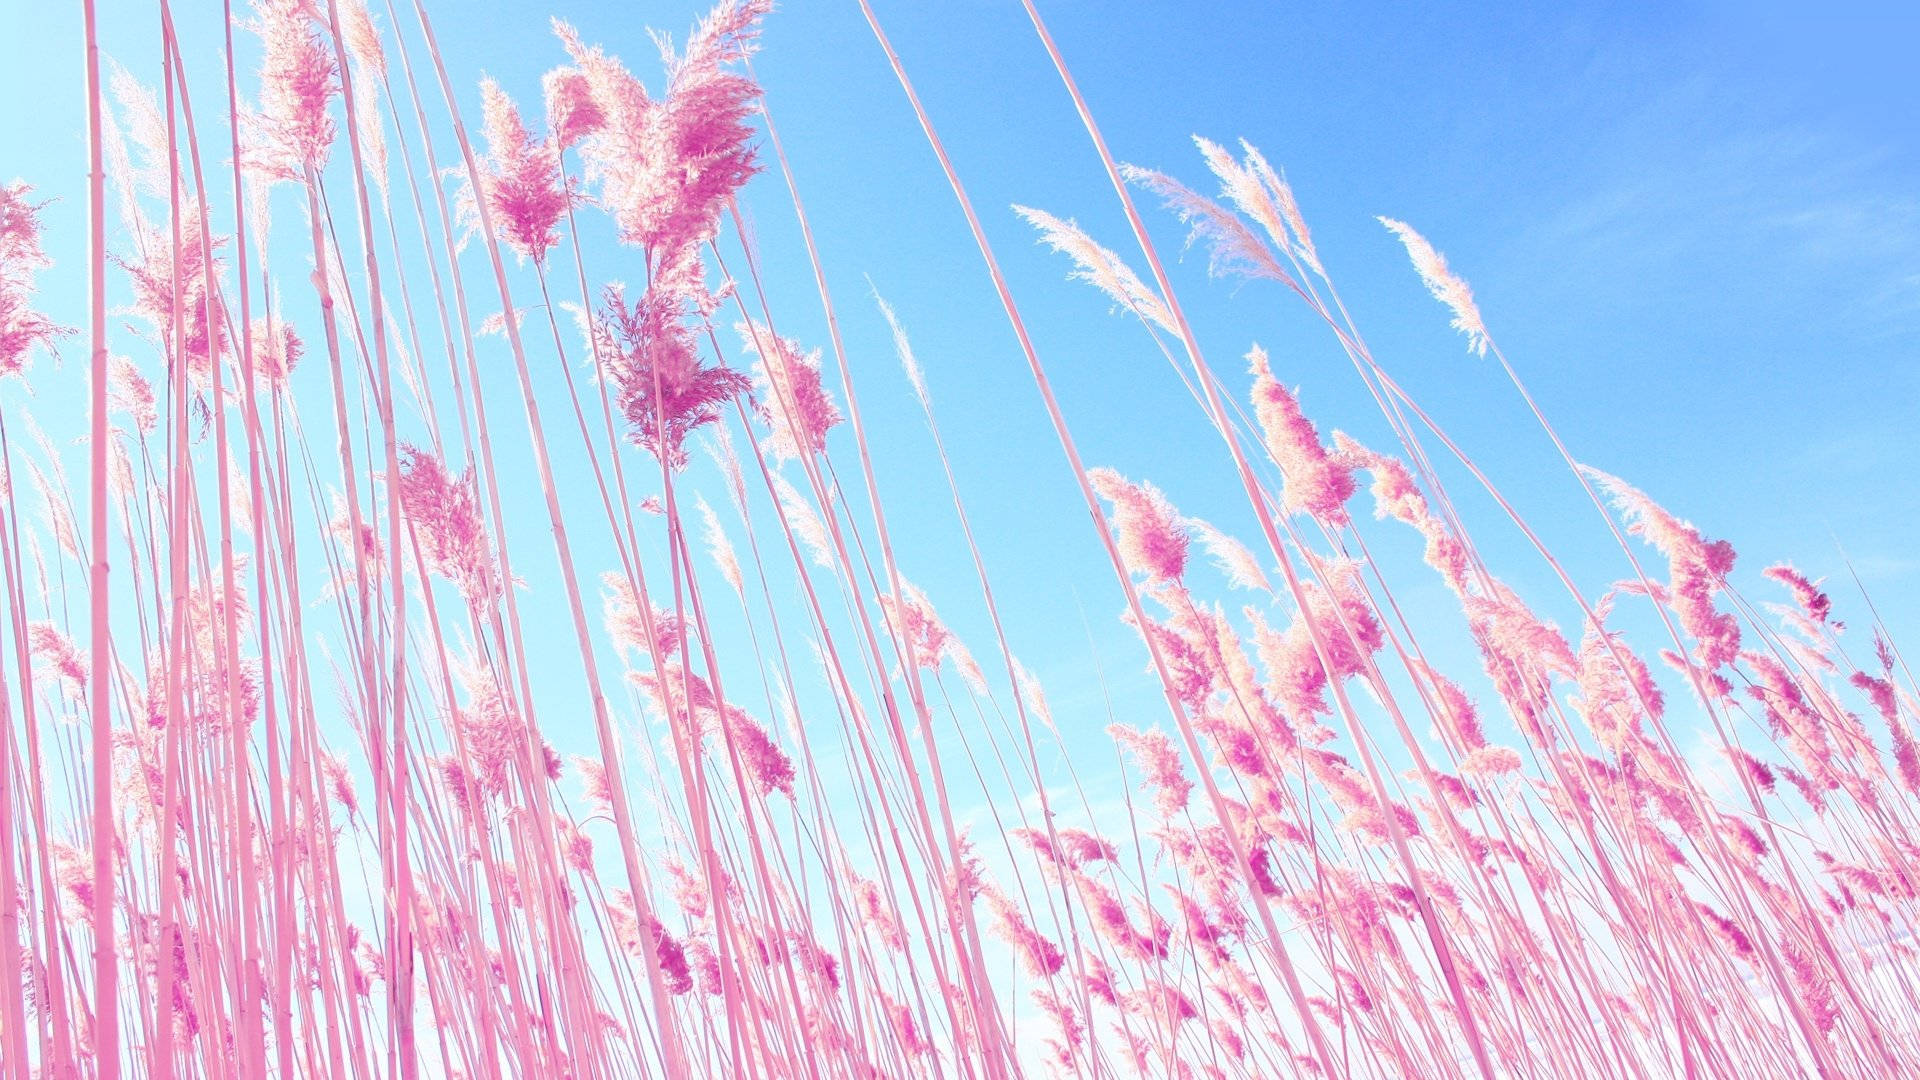 Blue Pastel Aesthetic Pink Field Background